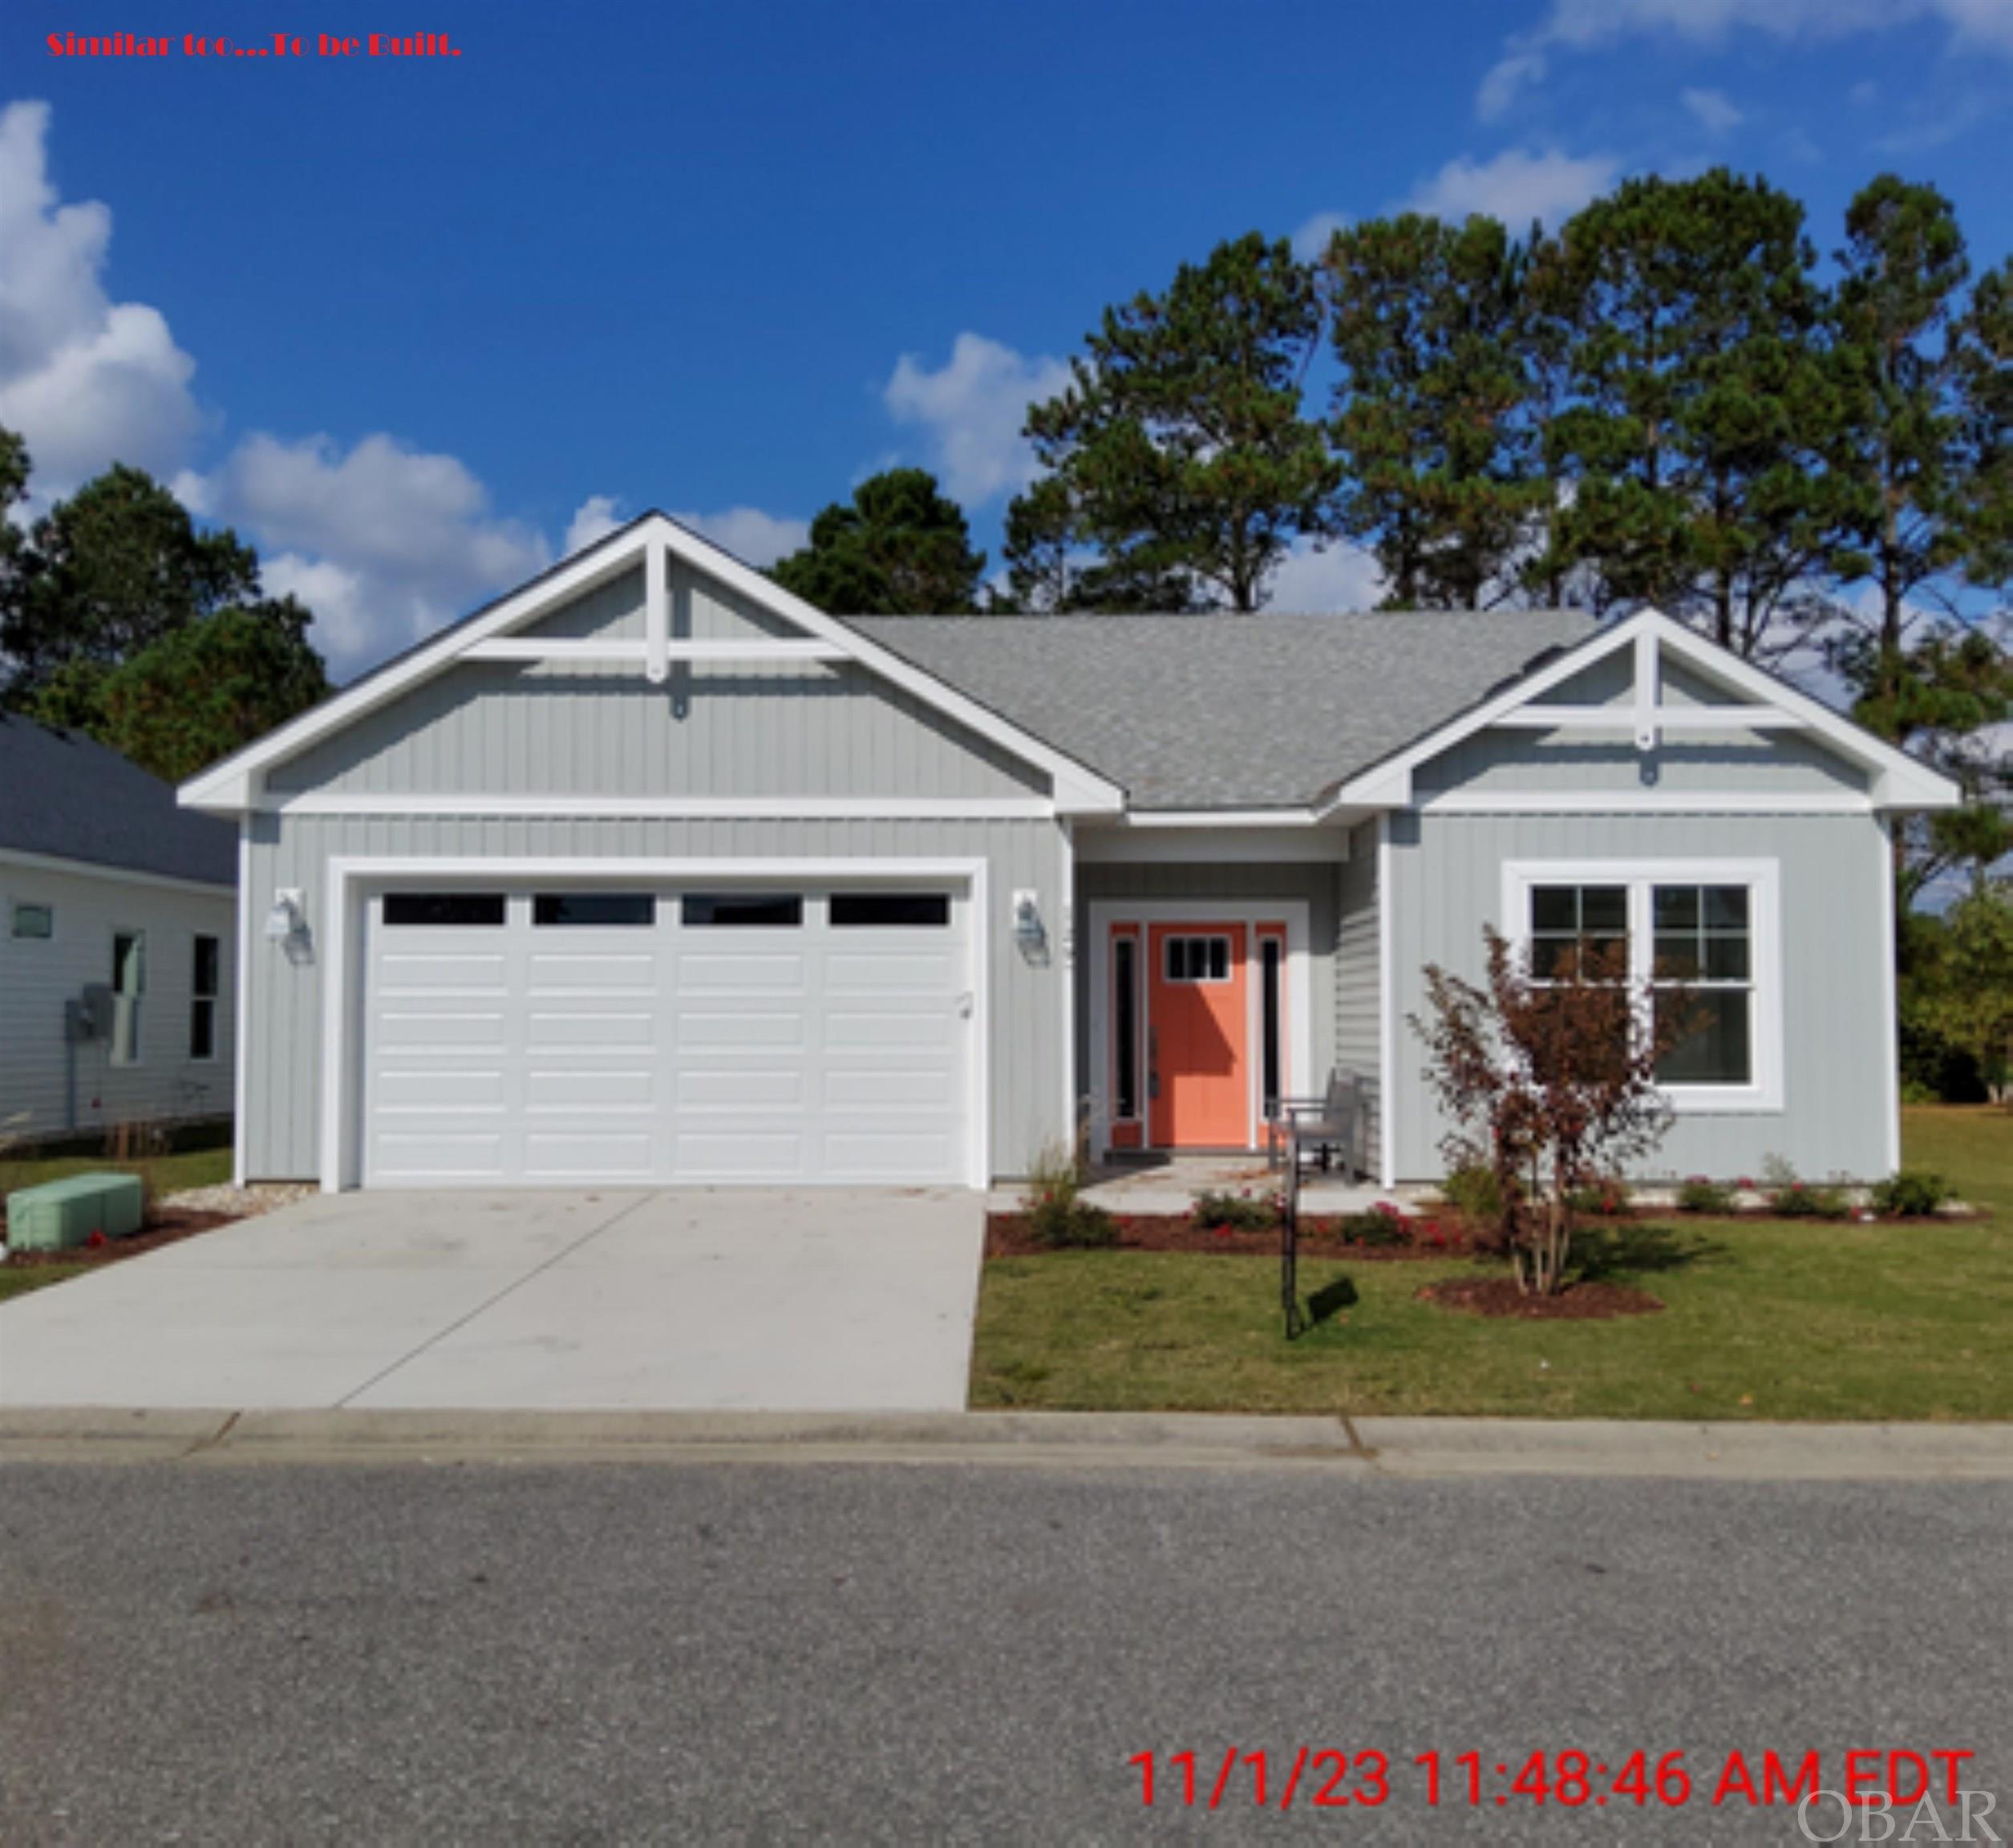 801 Waterfront Drive, Grandy, NC 27939, 3 Bedrooms Bedrooms, ,2 BathroomsBathrooms,Residential,For sale,Waterfront Drive,125398